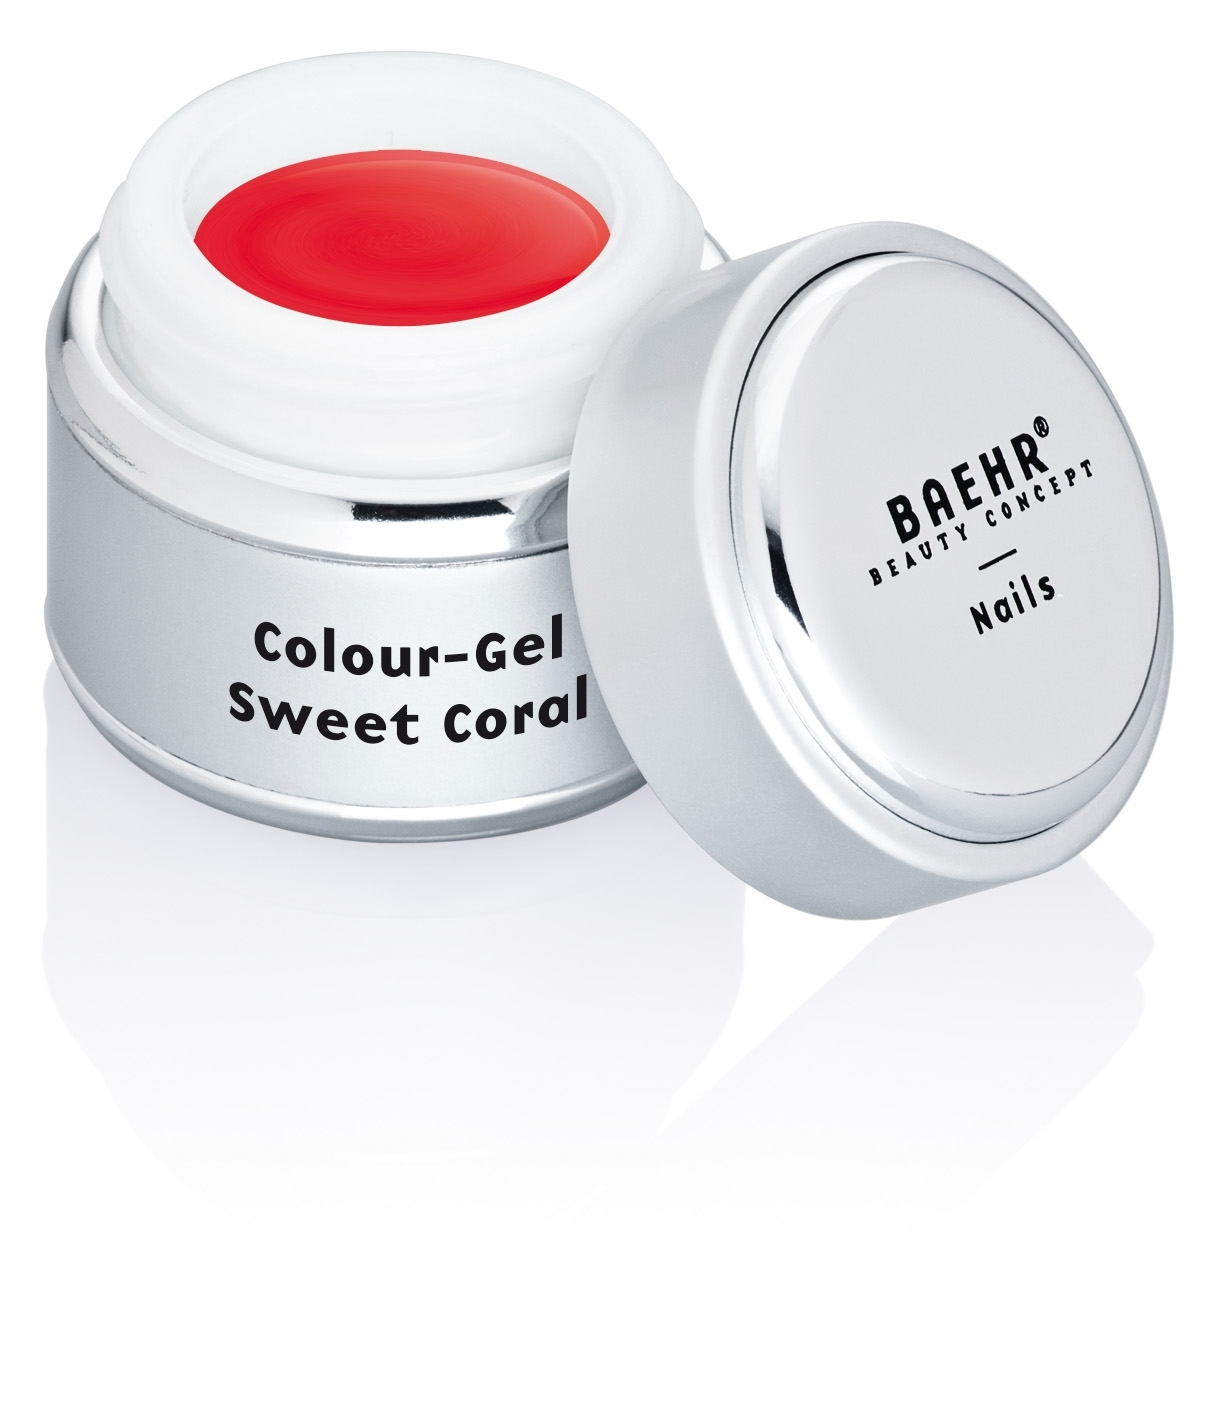 BAEHR BEAUTY CONCEPT - NAILS Colour-Gel Sweet Coral 5 ml